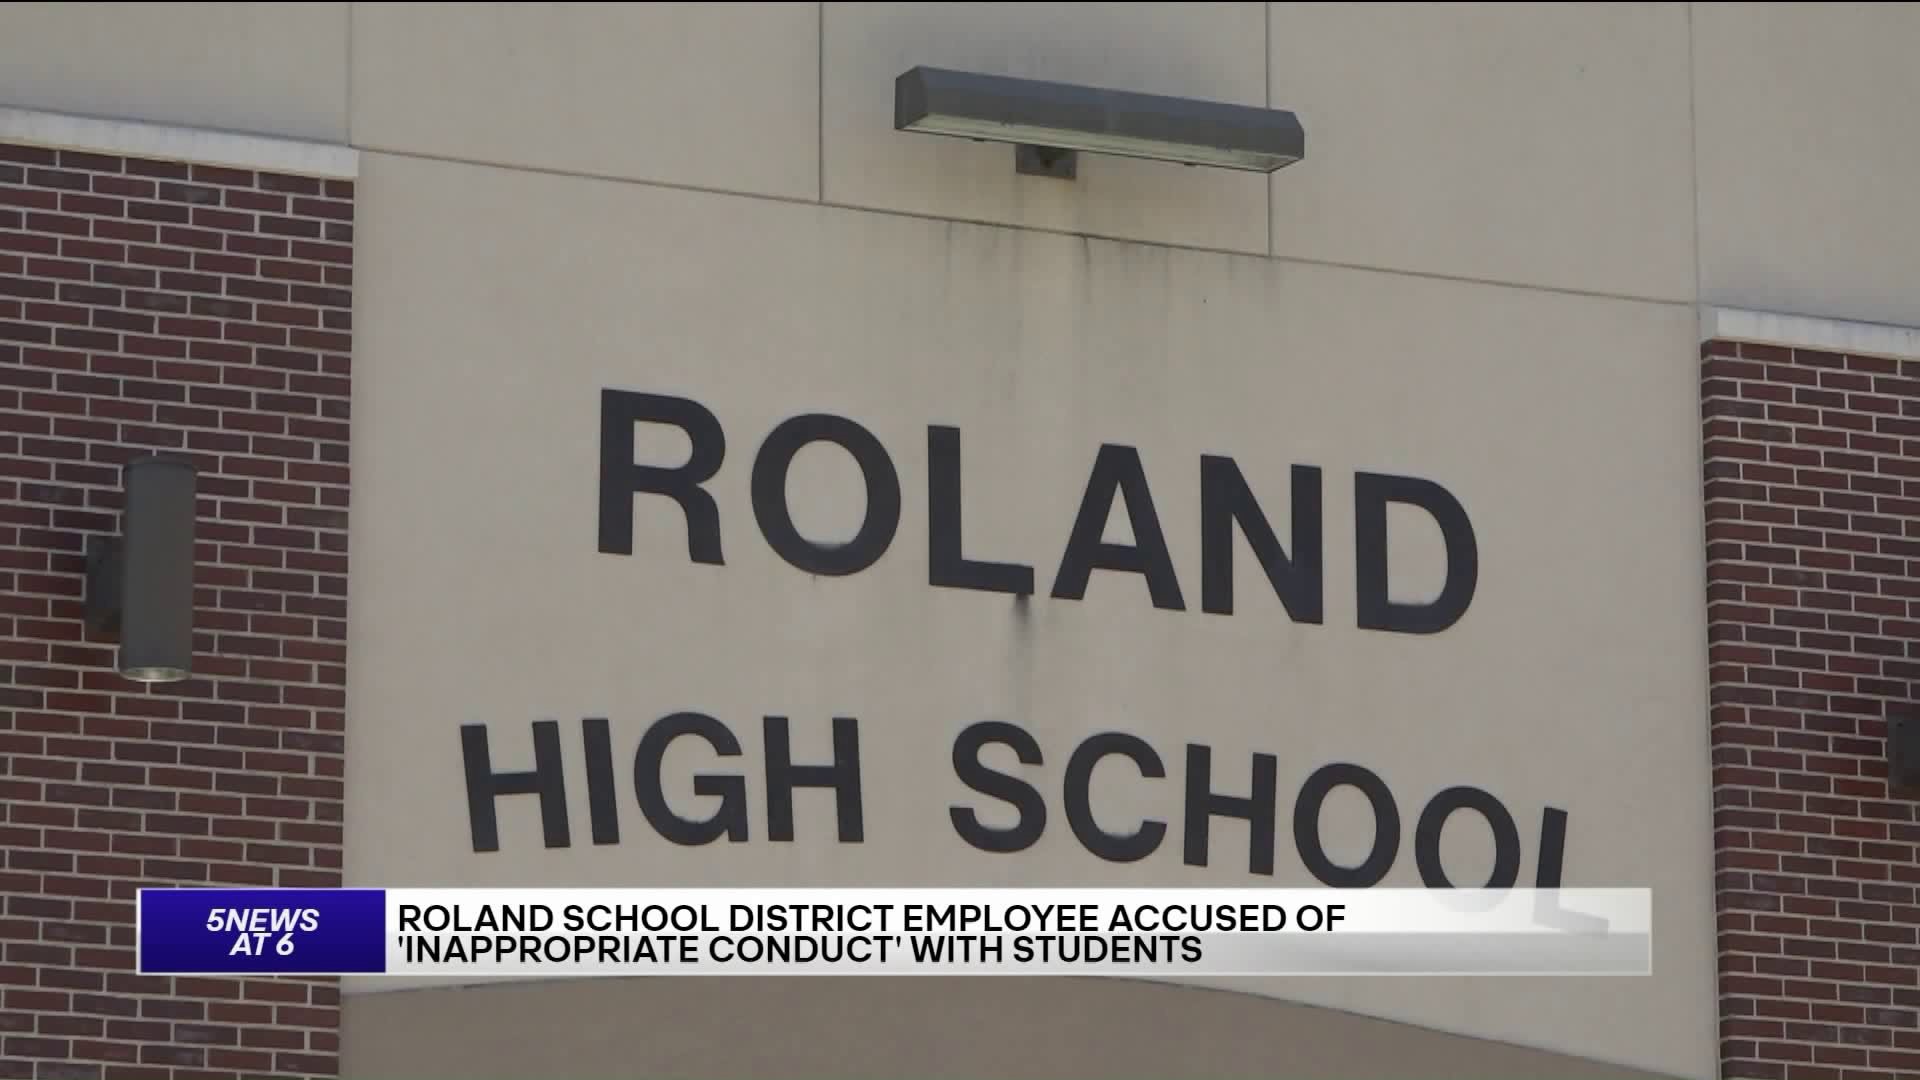 Roland School District Employee Accused Of "Inappropriate Conduct" With Students